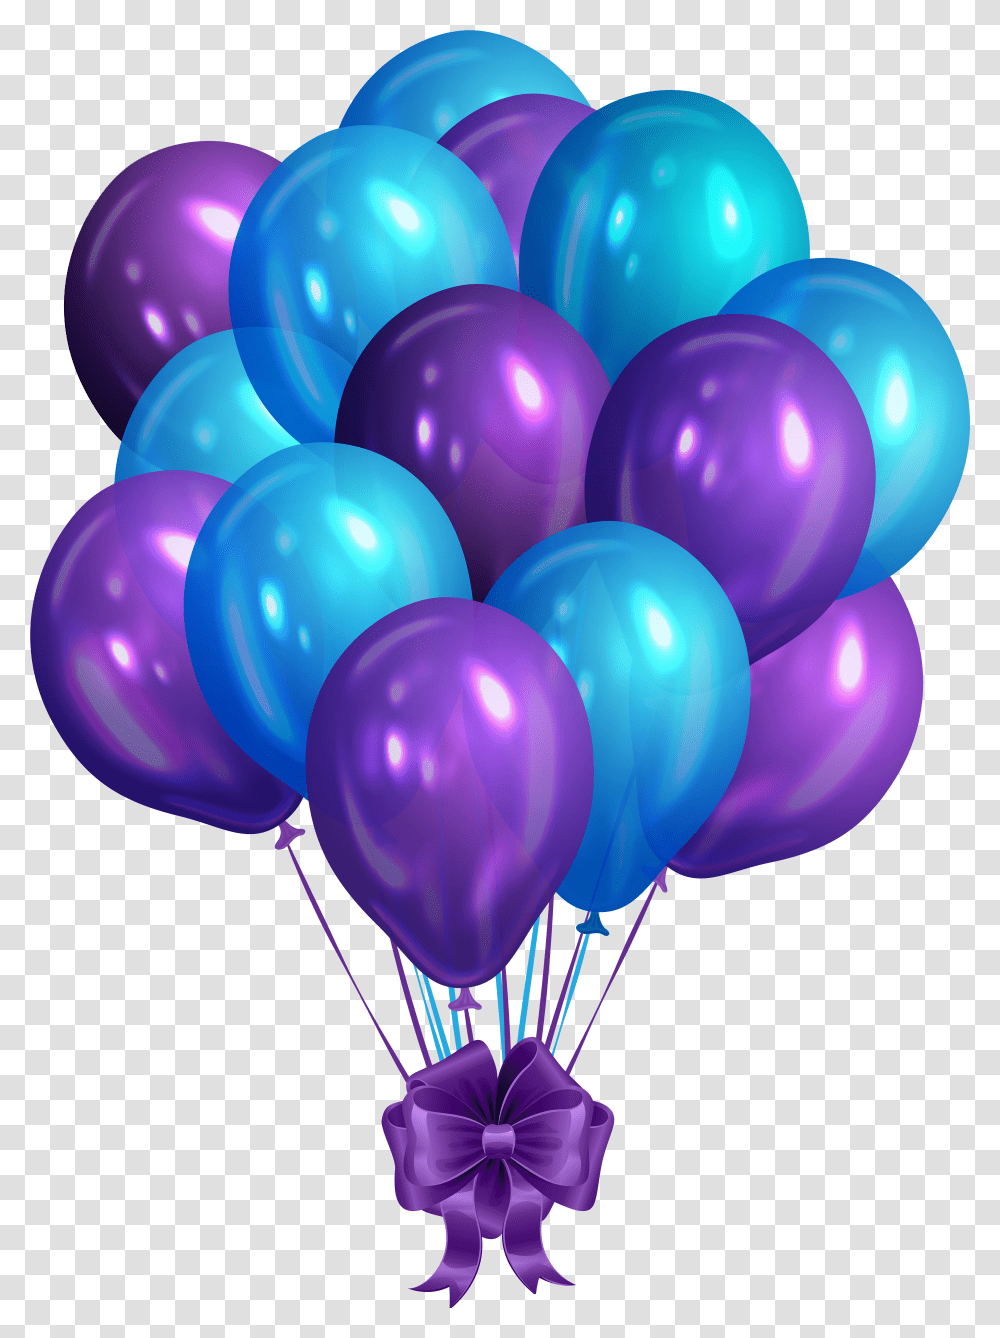 Blue Purple Bunch Of Balloons Clip Art Image Red And Blue Balloons Transparent Png